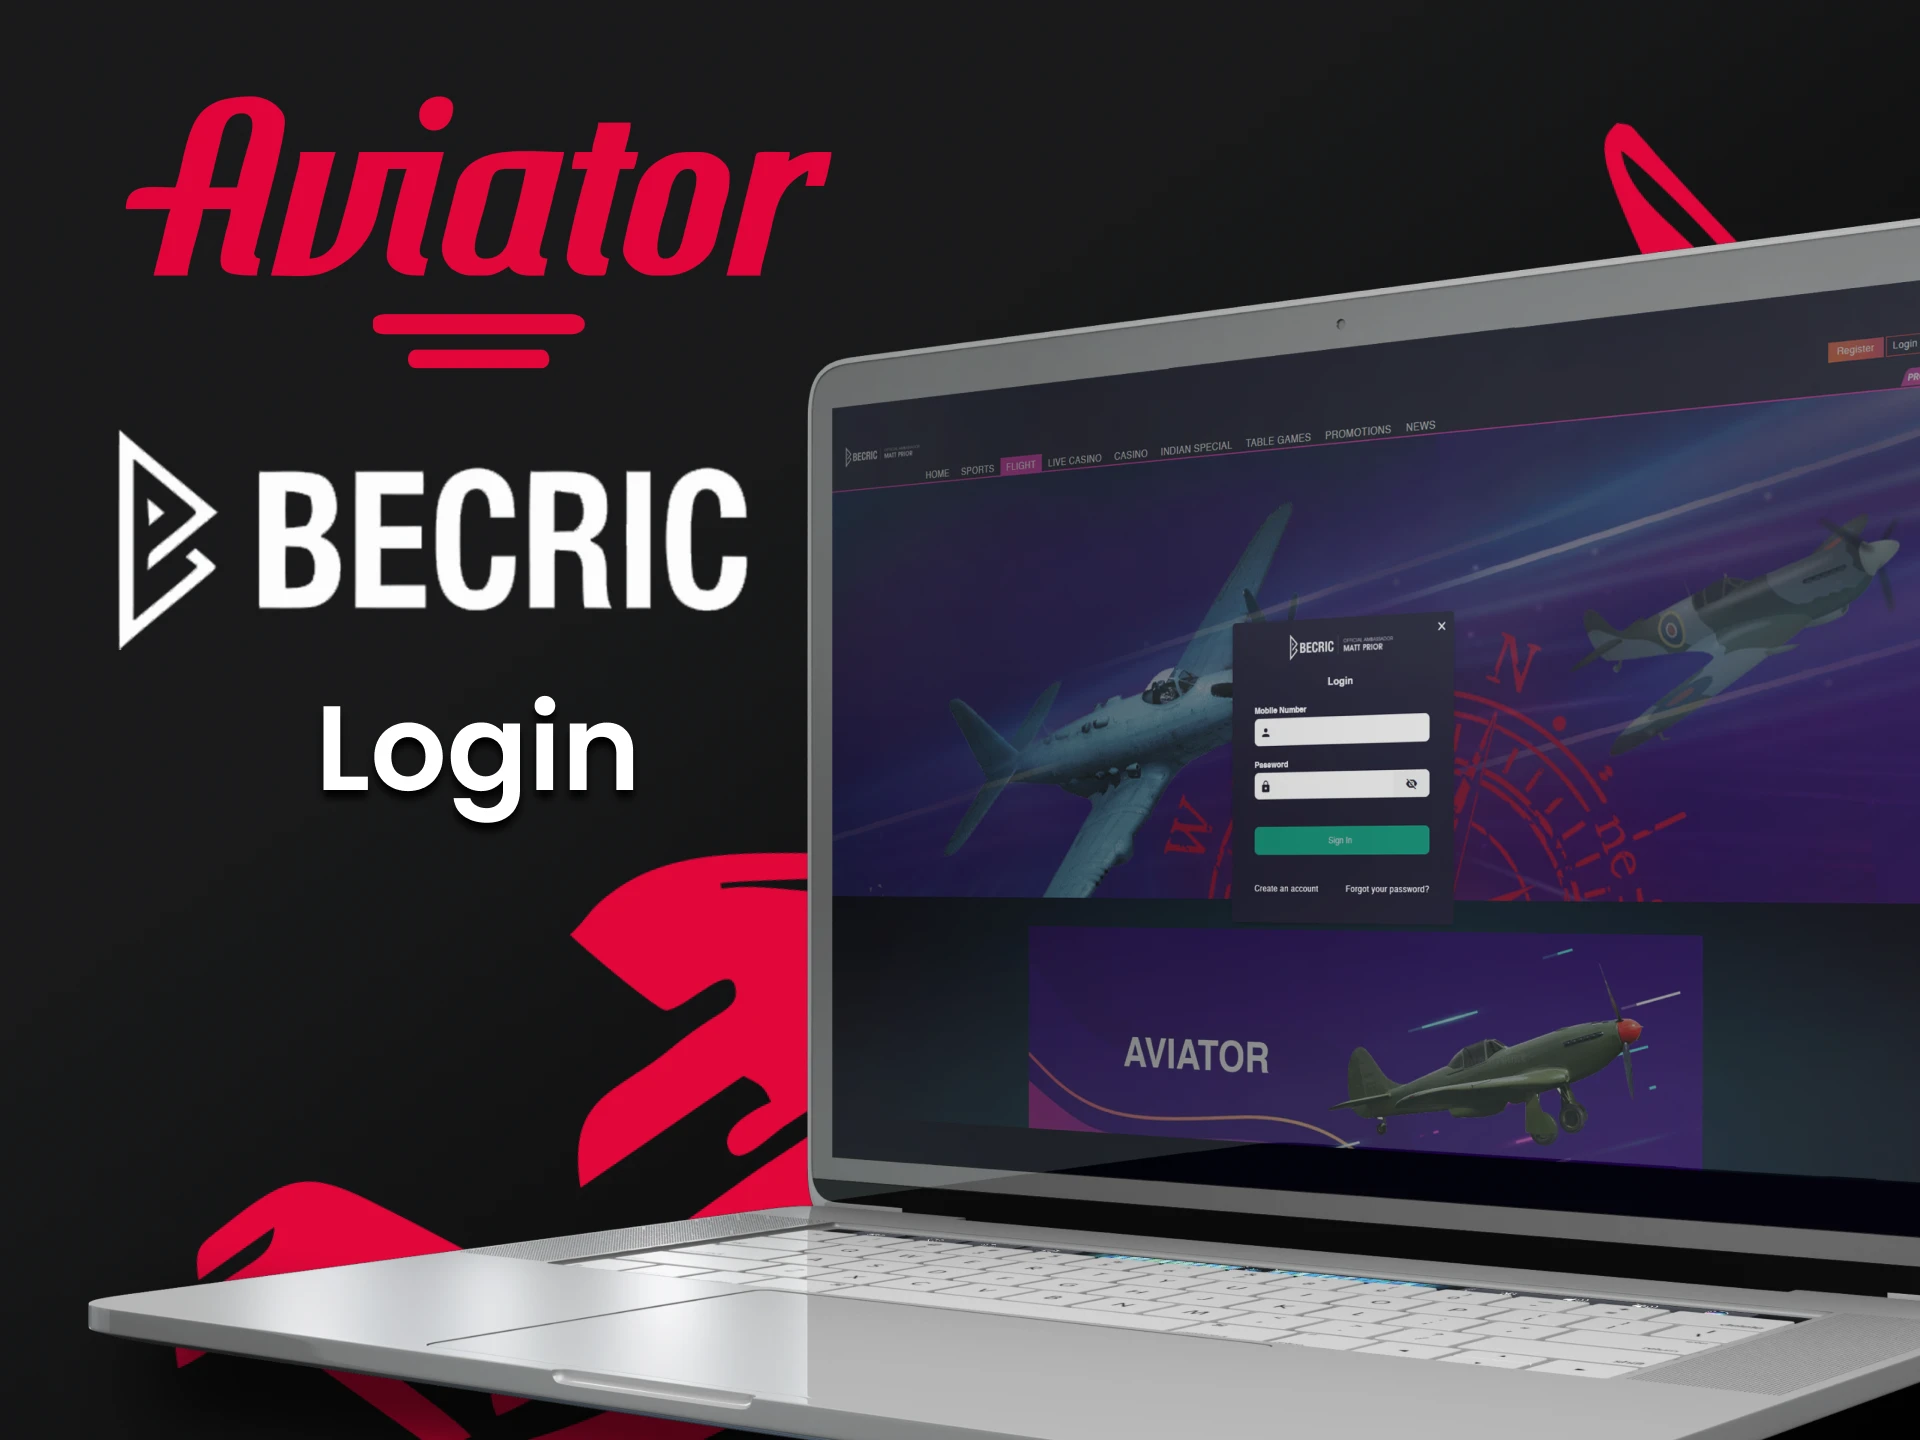 To start playing Aviator, you need to log in to your personal Becric account.